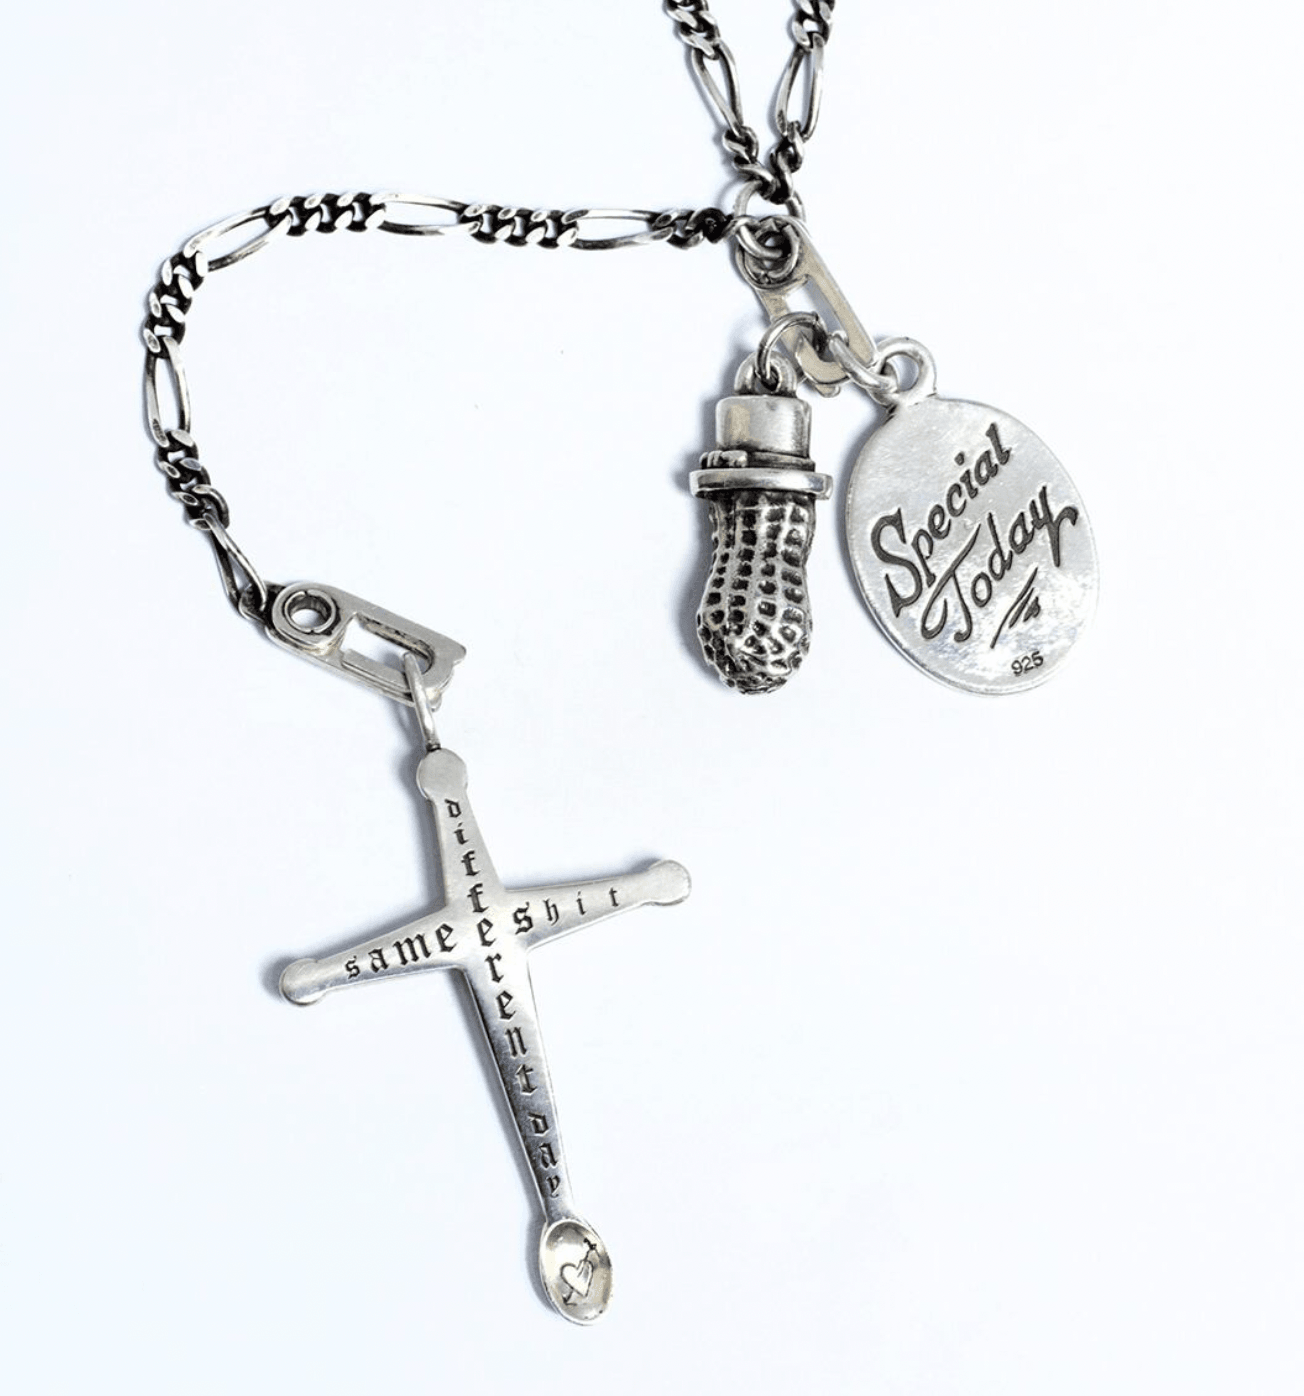 Image showing the Peanuts & Co SAME SHIT DIFFERENT DAY Chain - Silver which is a Jewellery described by the following info Accessories, Jewellery, Peanuts & Co, Released and sold on the IRON HEART GERMANY online store